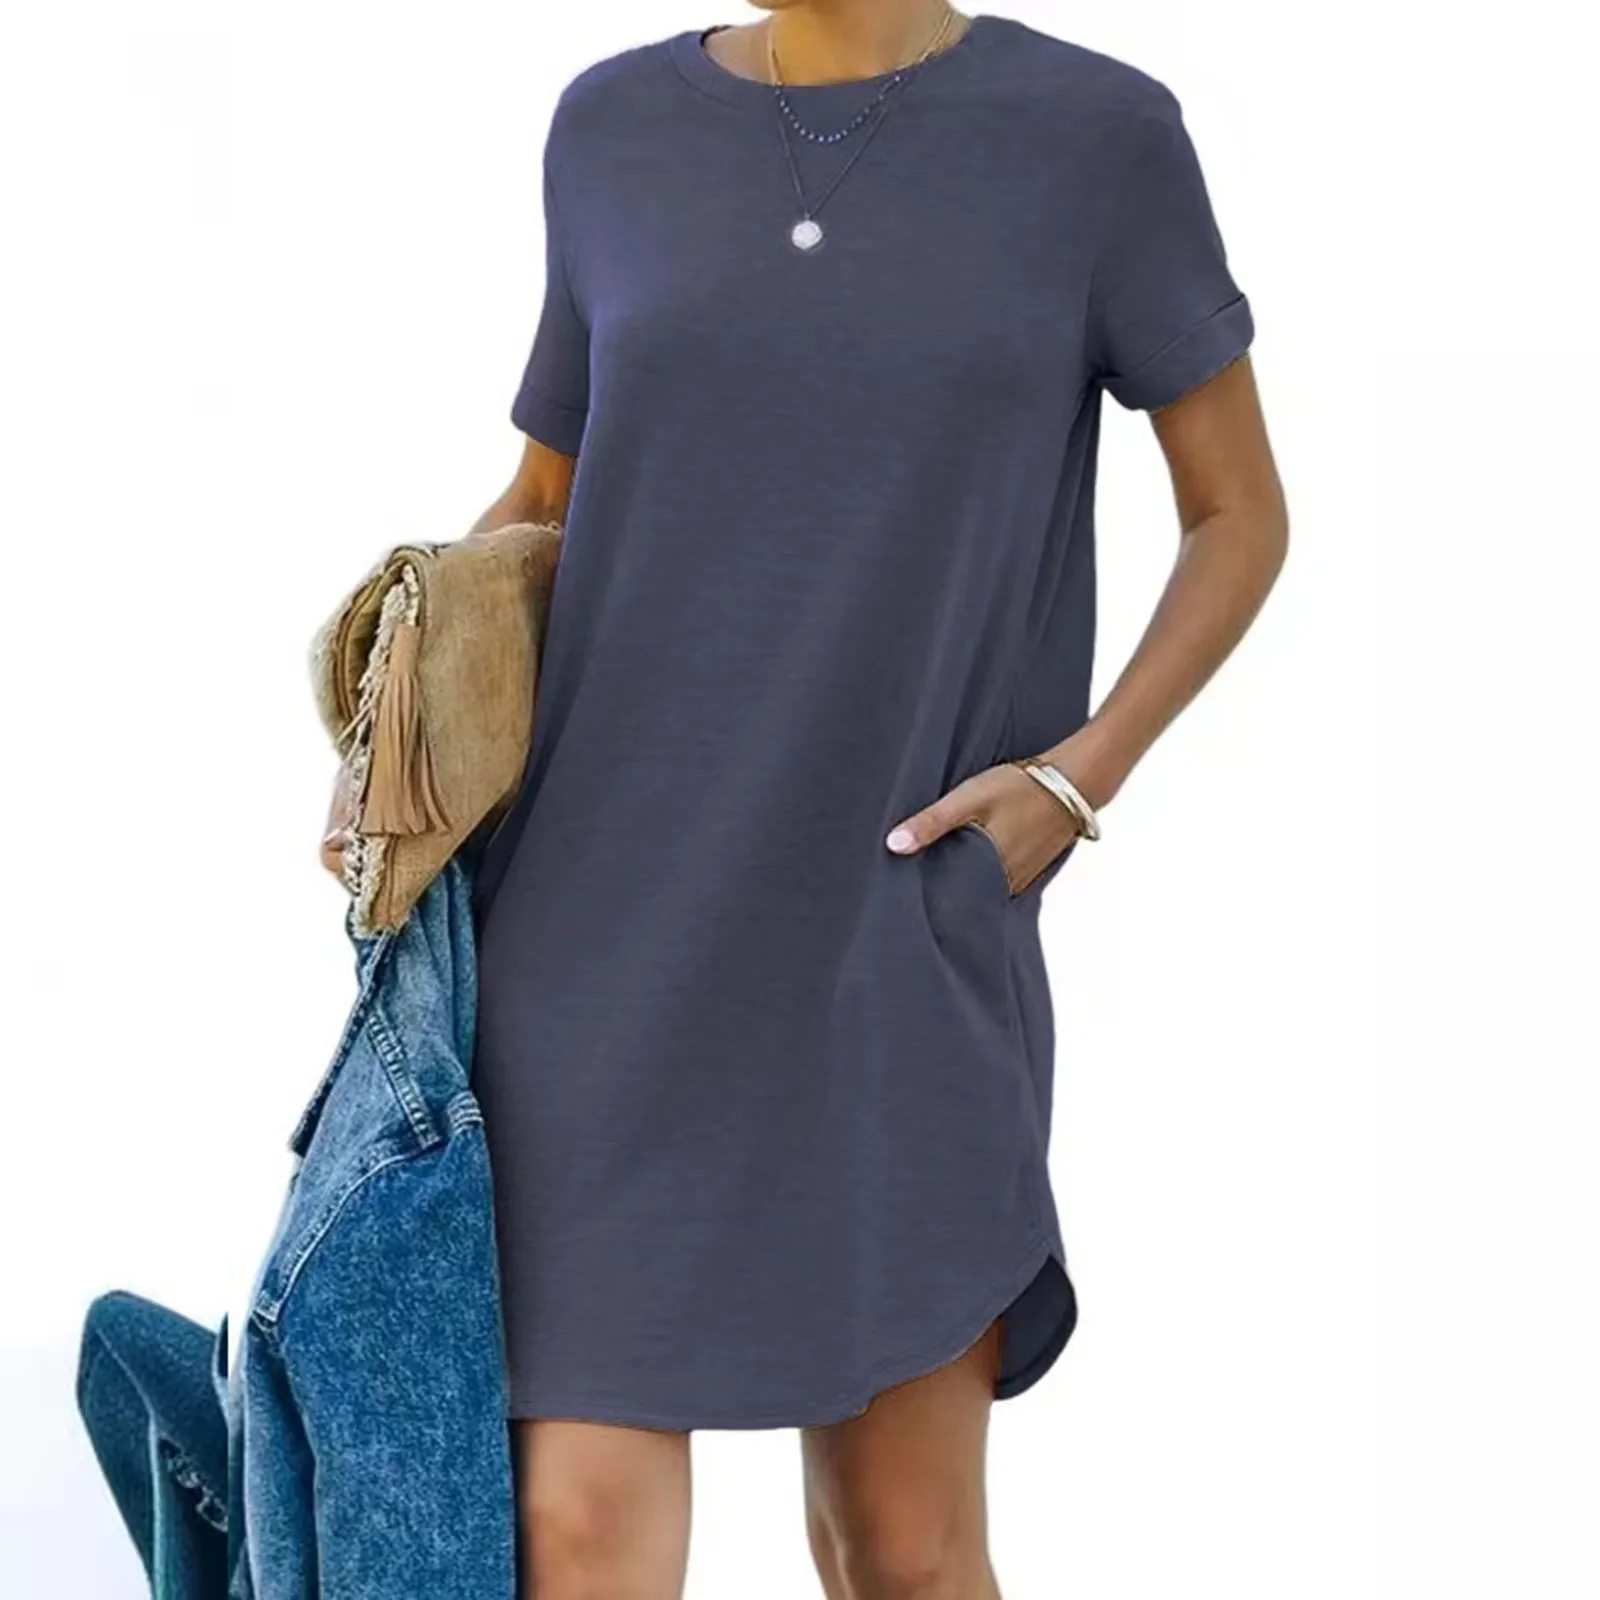 

Women‘s Summer Casual Midi Dress Round Neck Short Sleeve Solid Color Knee Length Dress Ladies Fashion Pockets Loose Fit Dresses